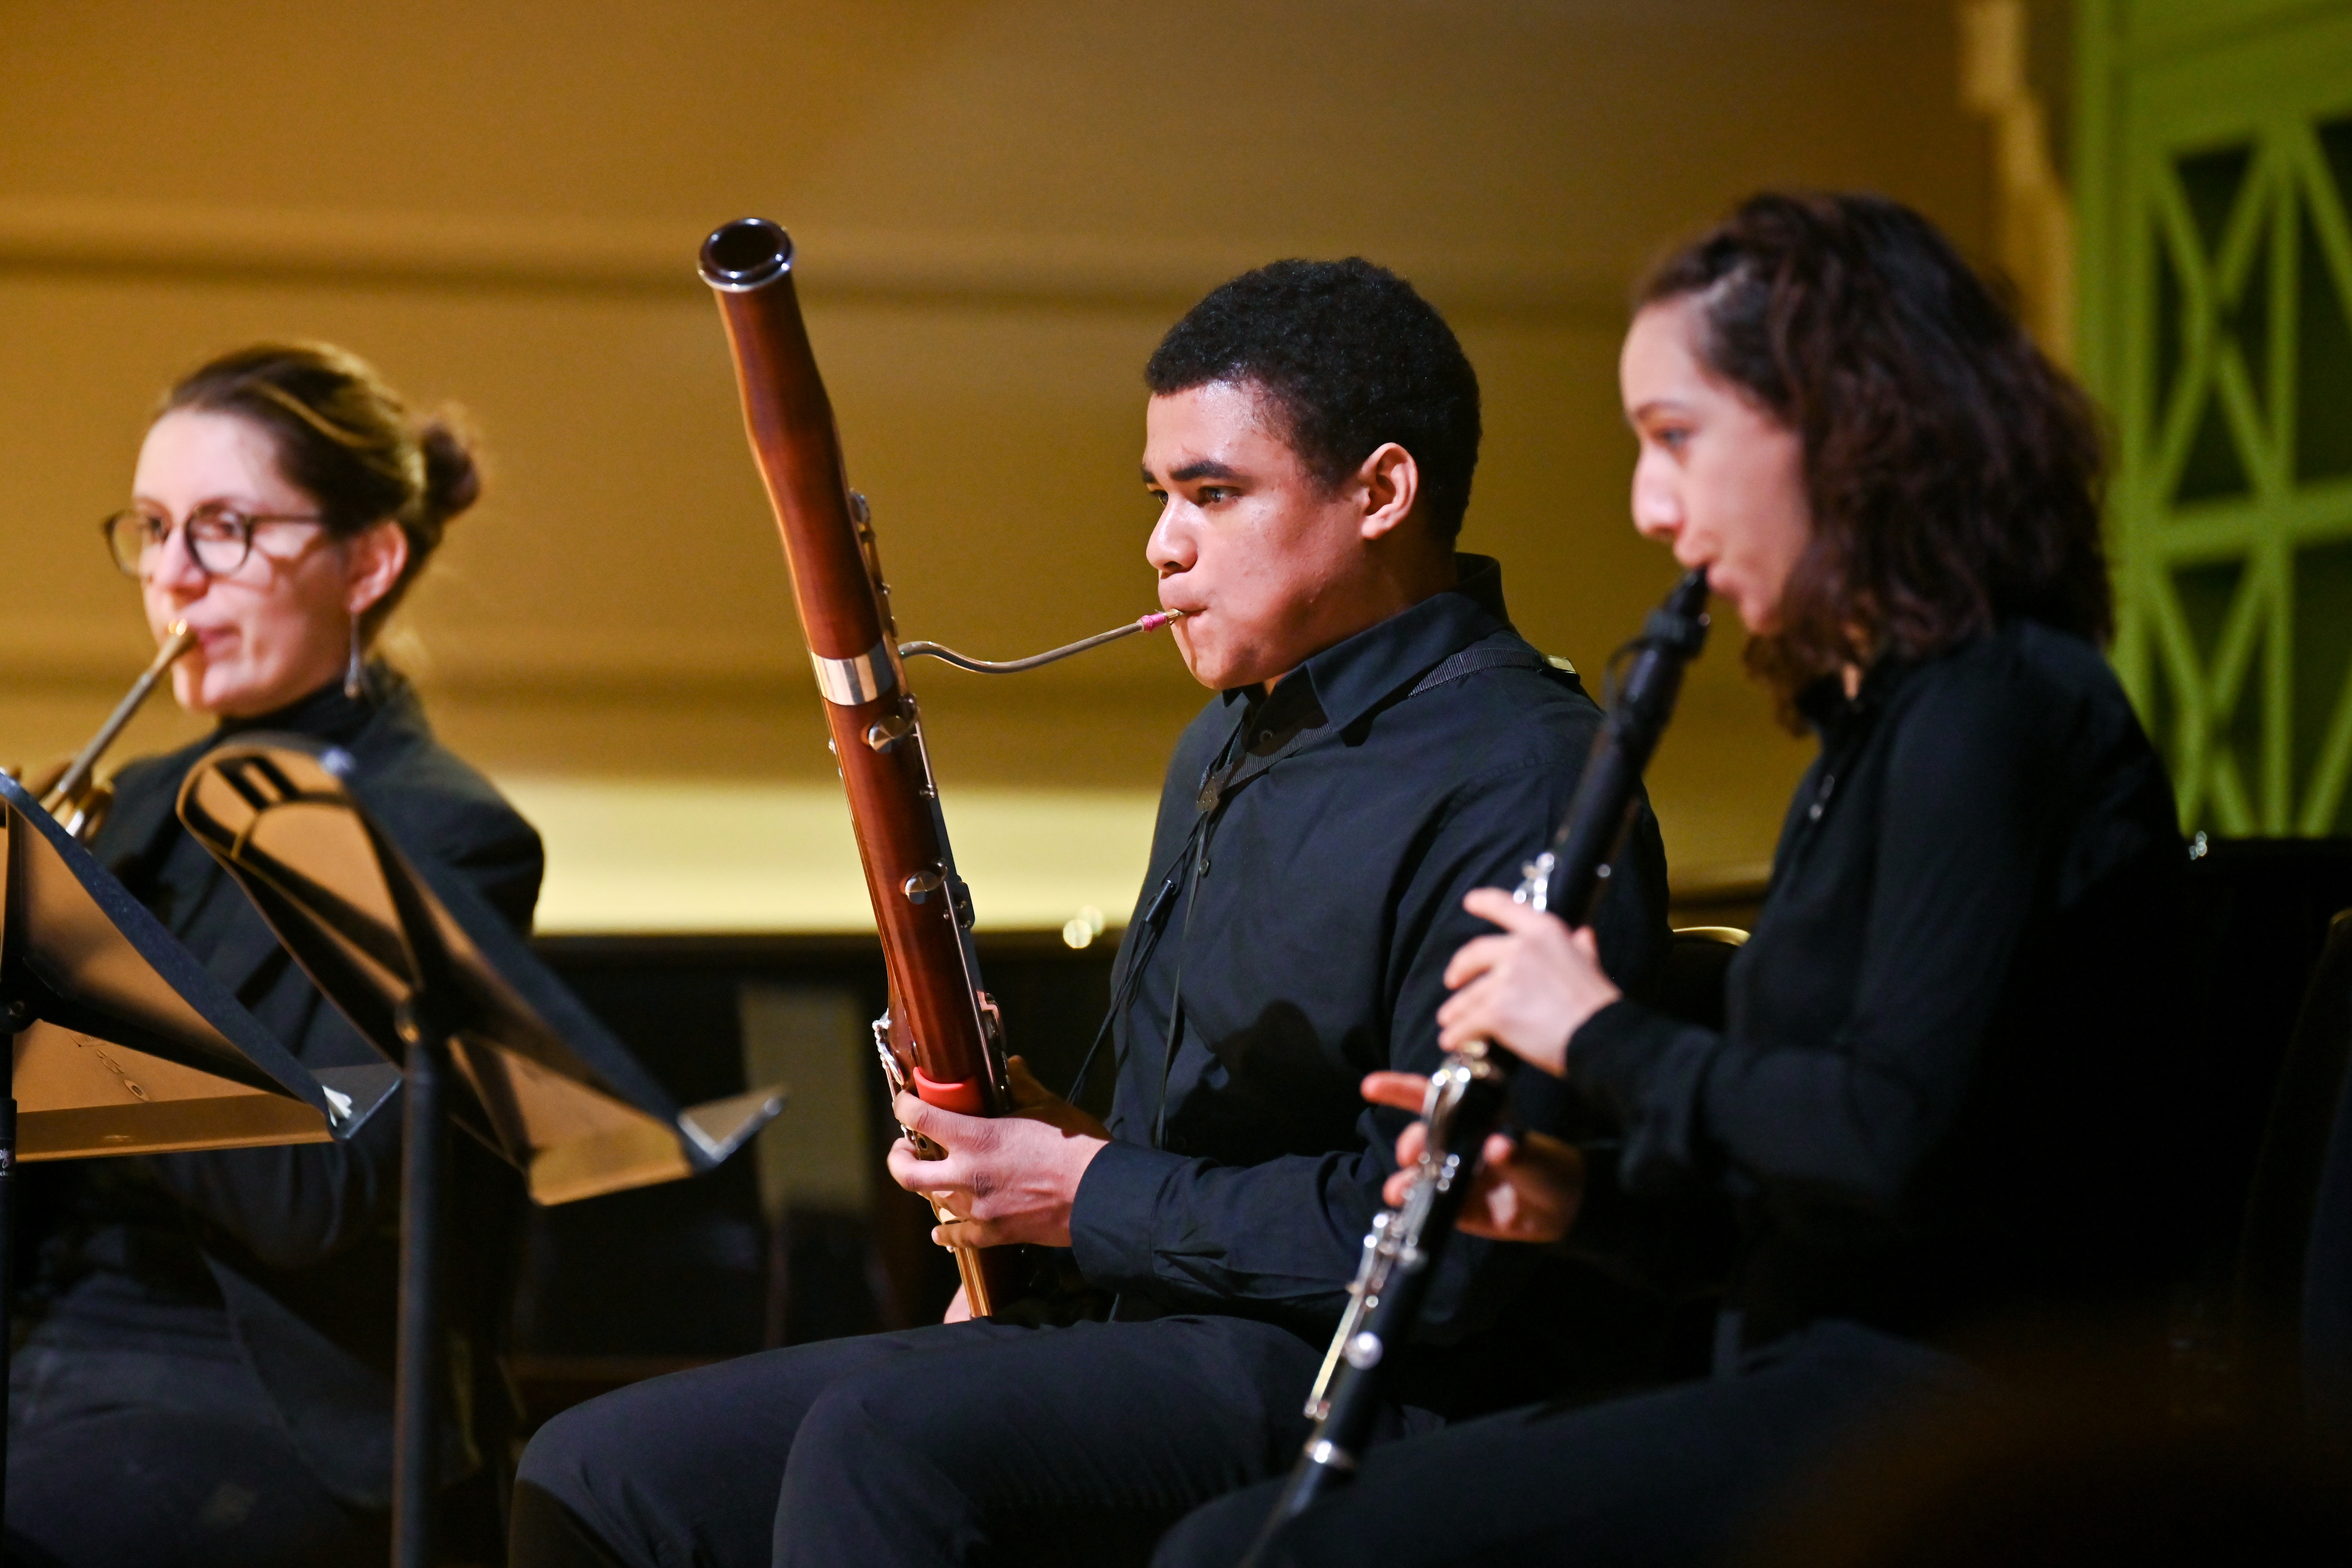 Chamber woodwind musicians performing in the Performance Hall